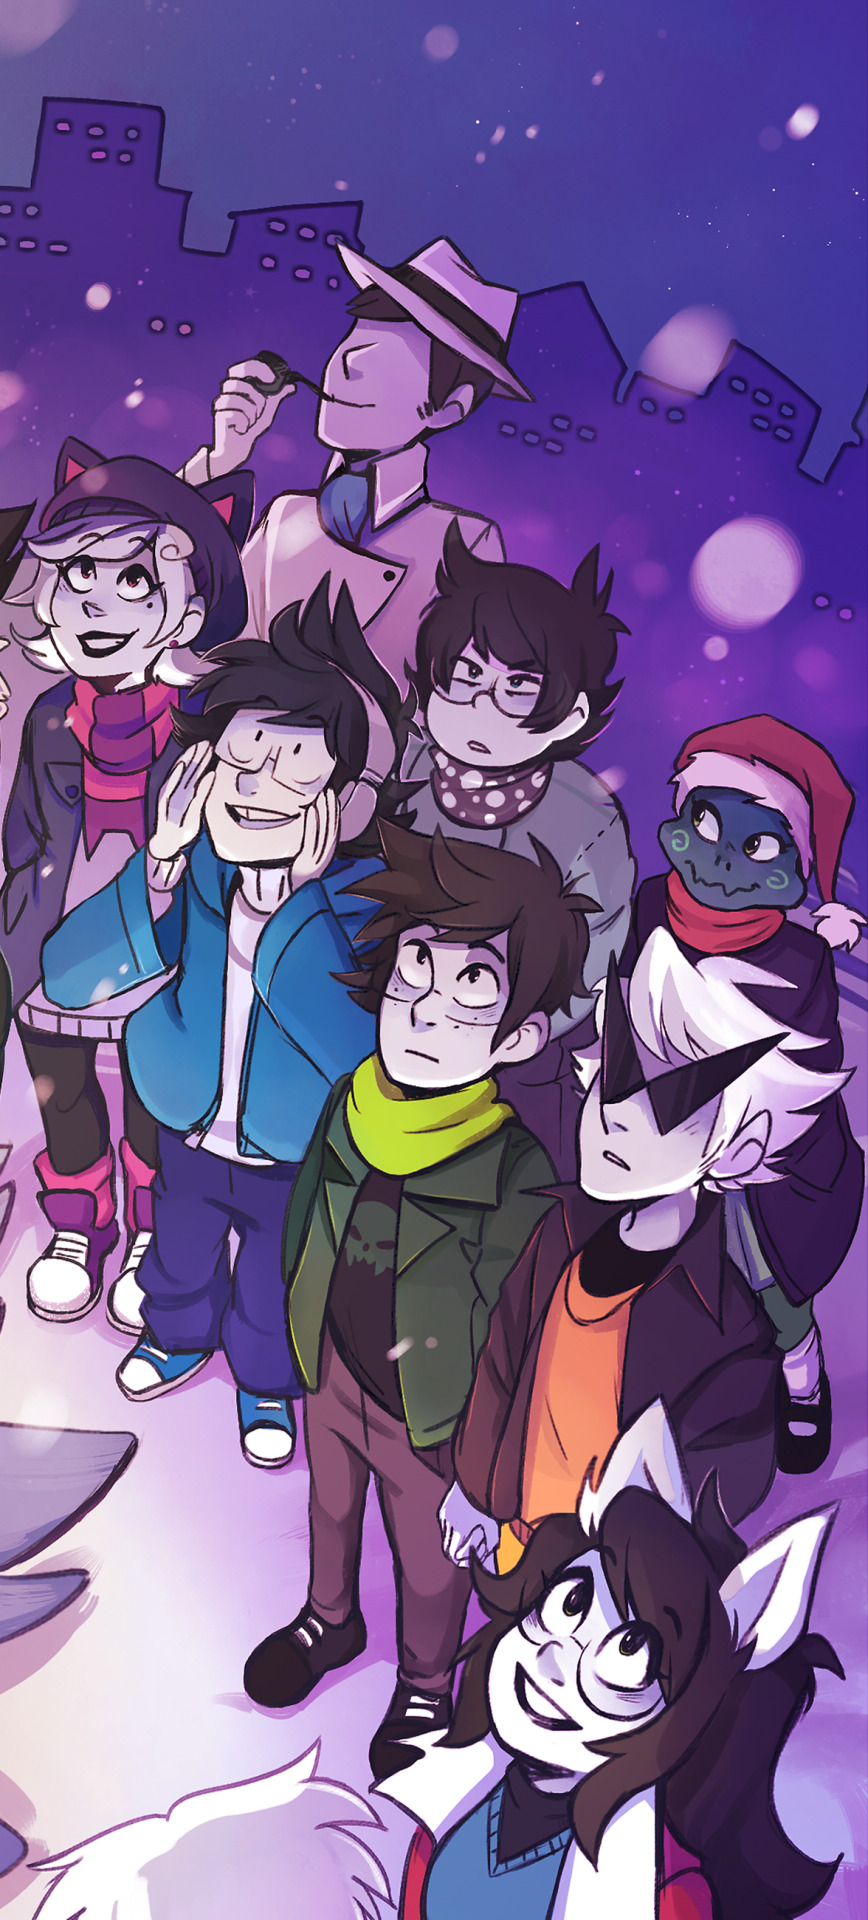  wohoo time to get in the holiday spirit!! hadn’t drawn the whole gang together